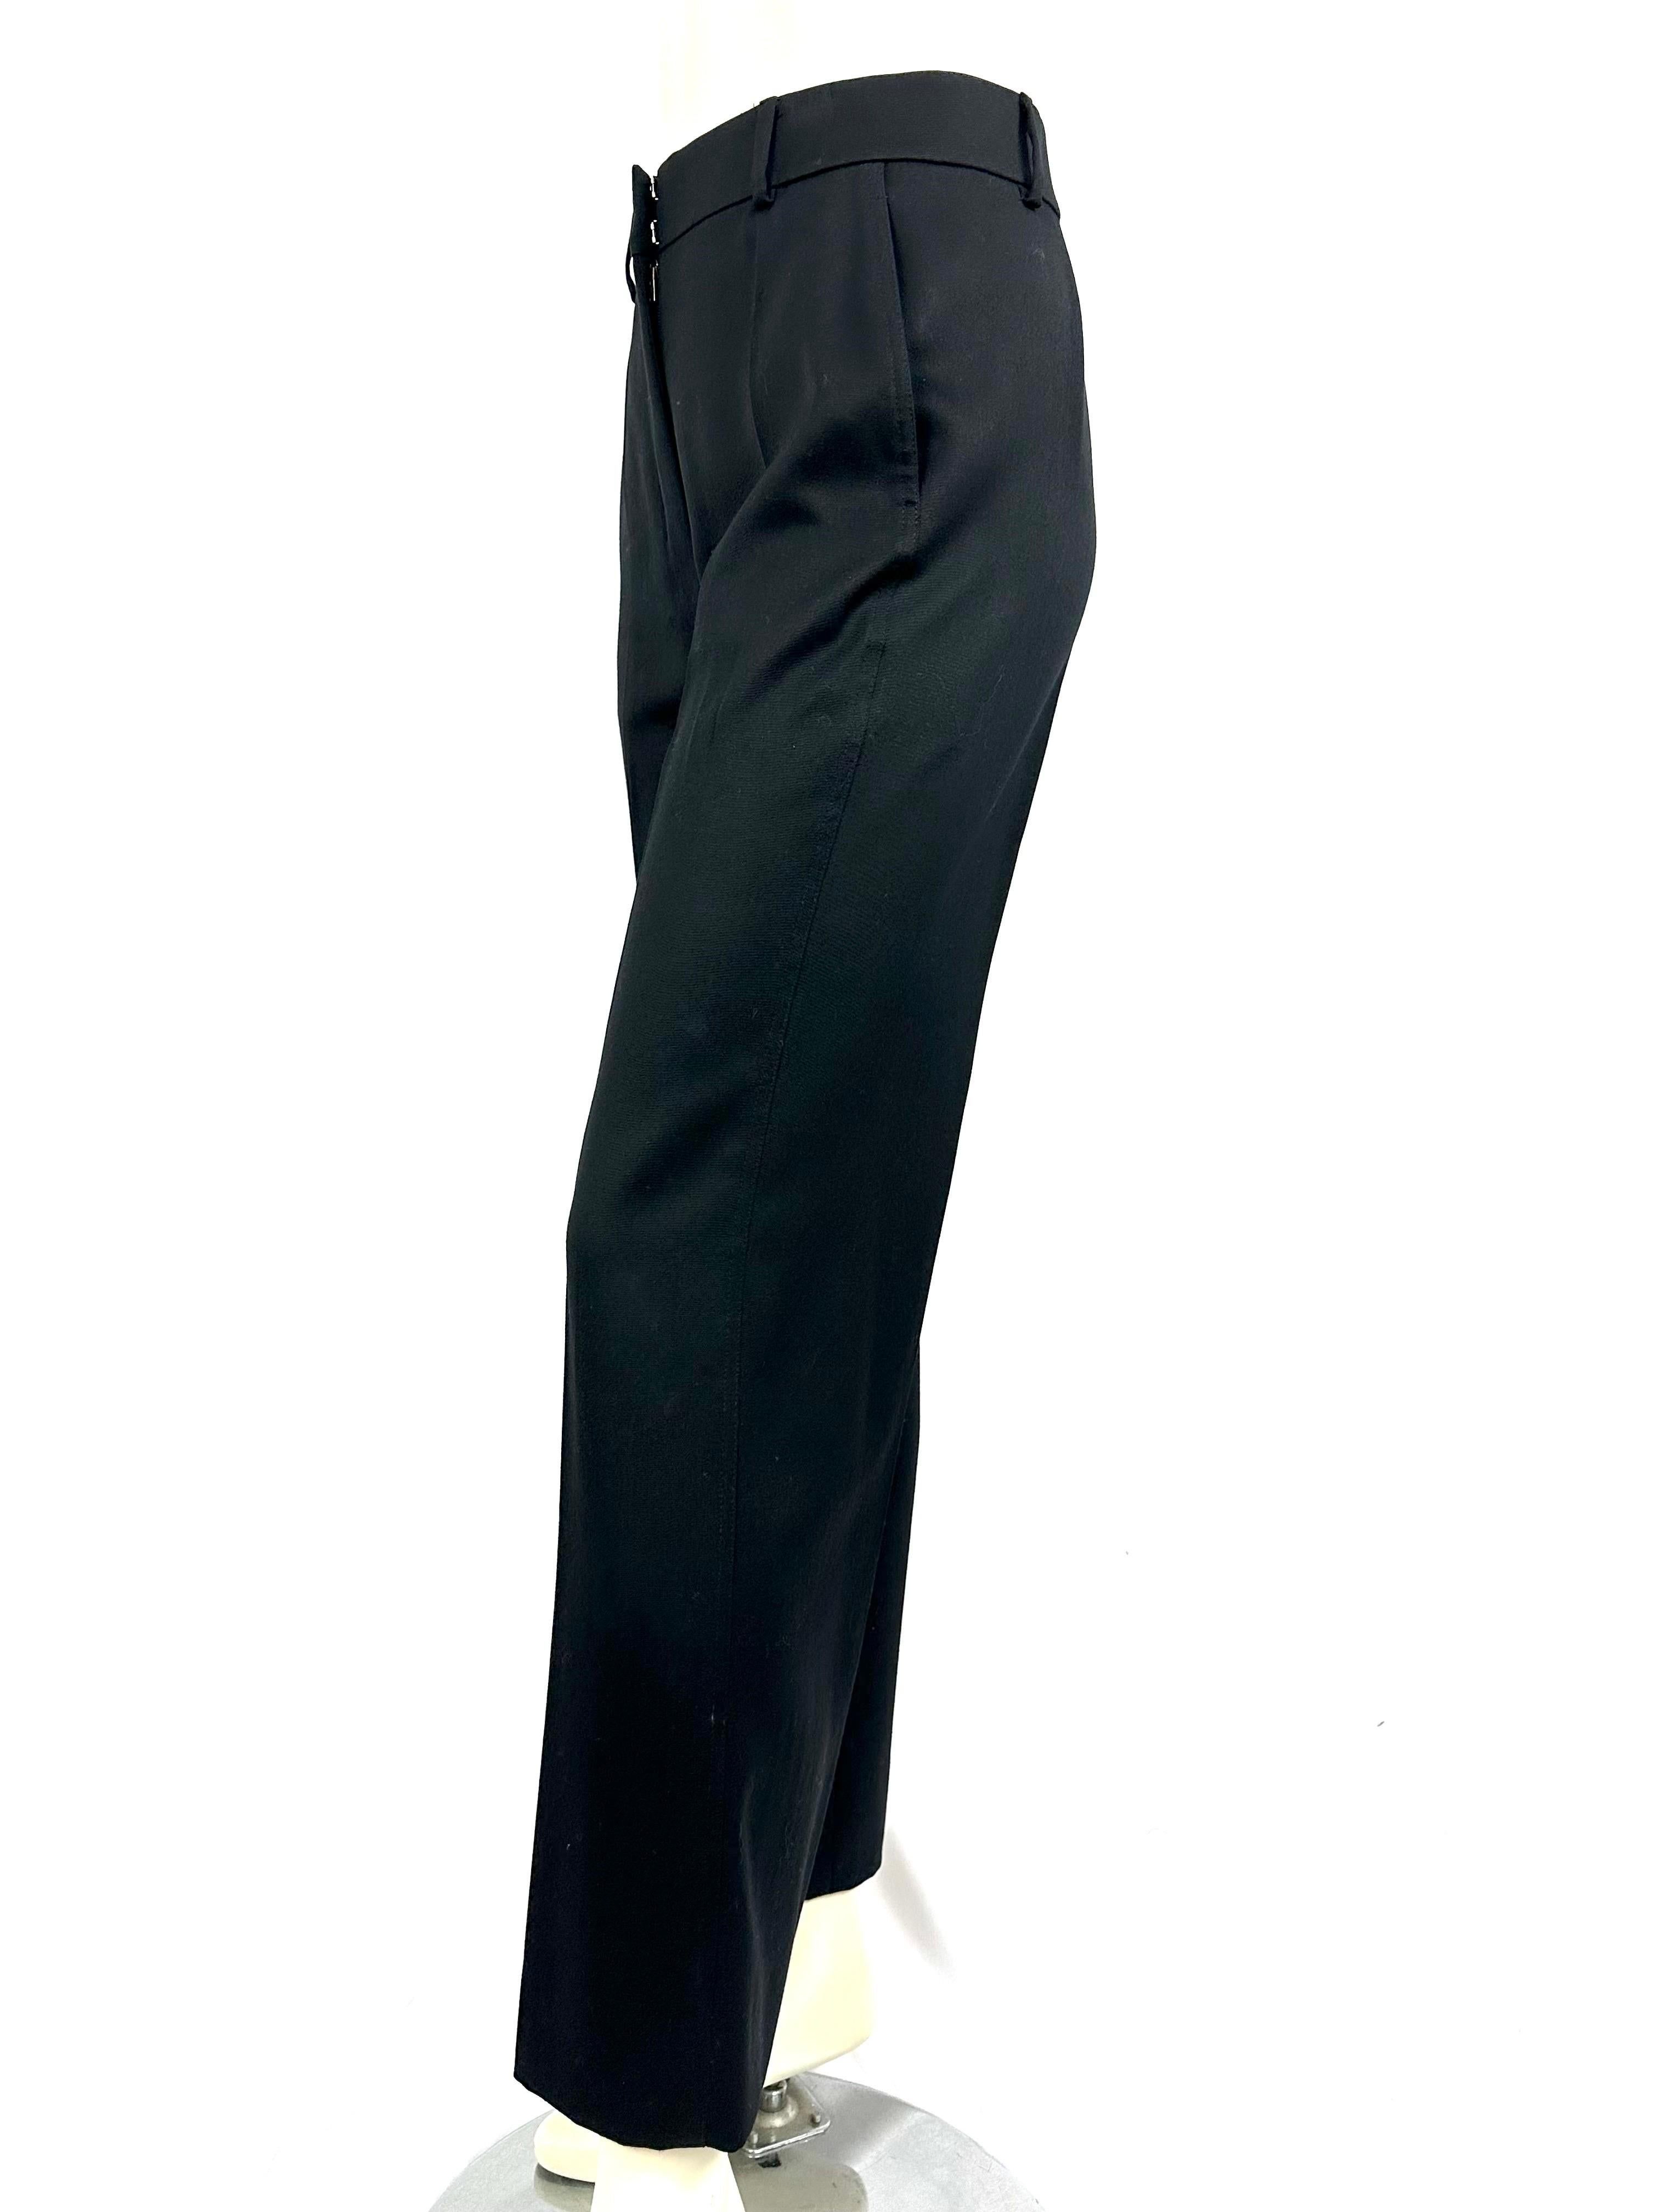 Black Vintage Ysl pants by Tom Ford in black wool from FW2003 collection For Sale